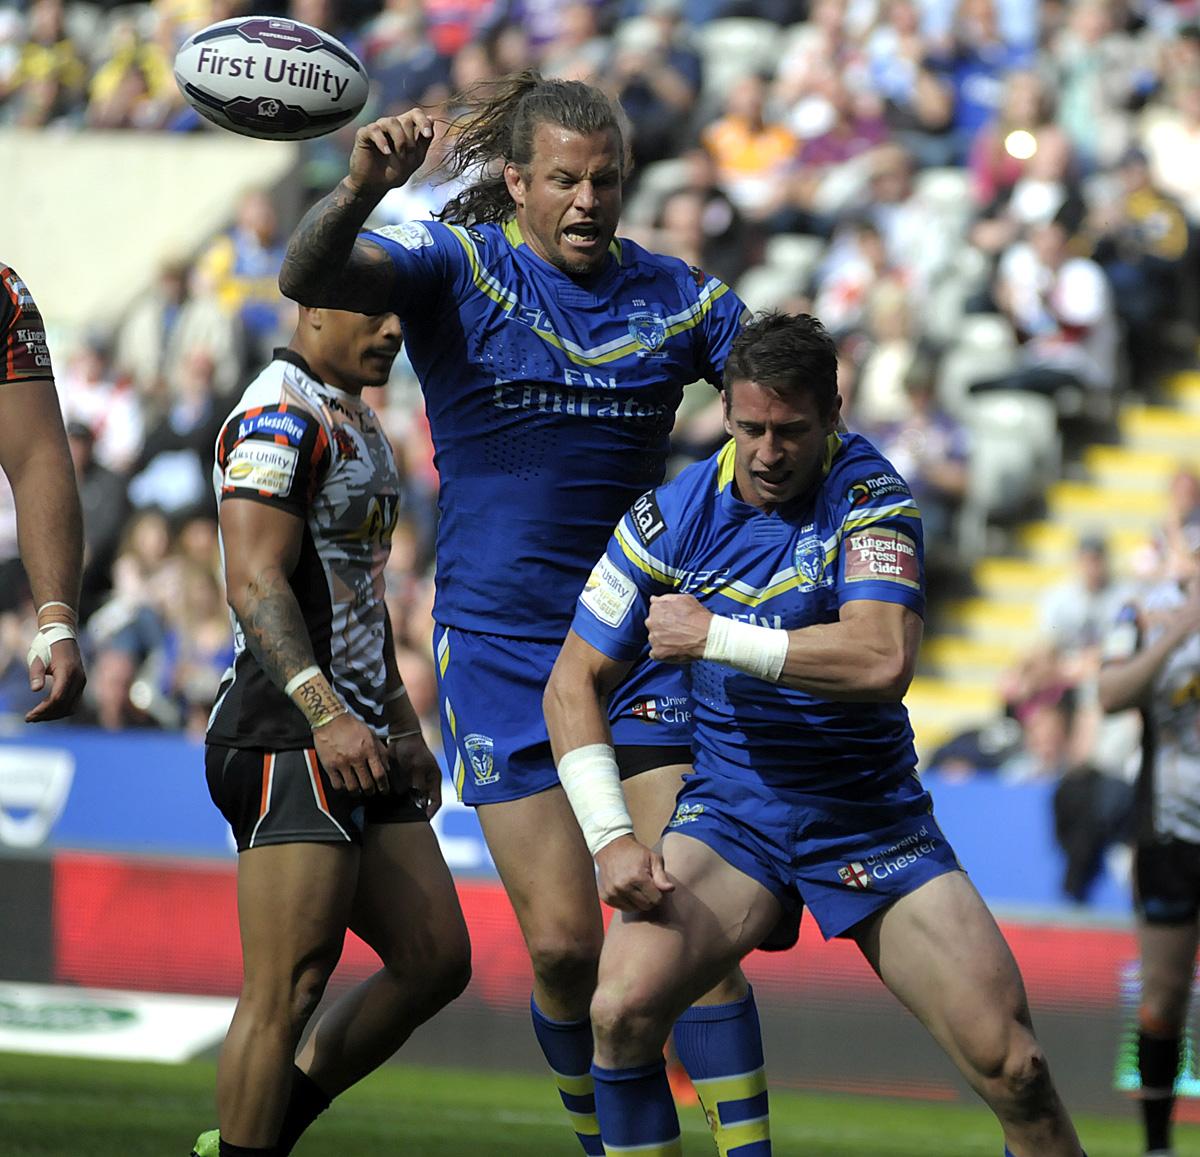 Action from St James' Park, Newcastle - Magic Weekend. Pictures by Mike Boden